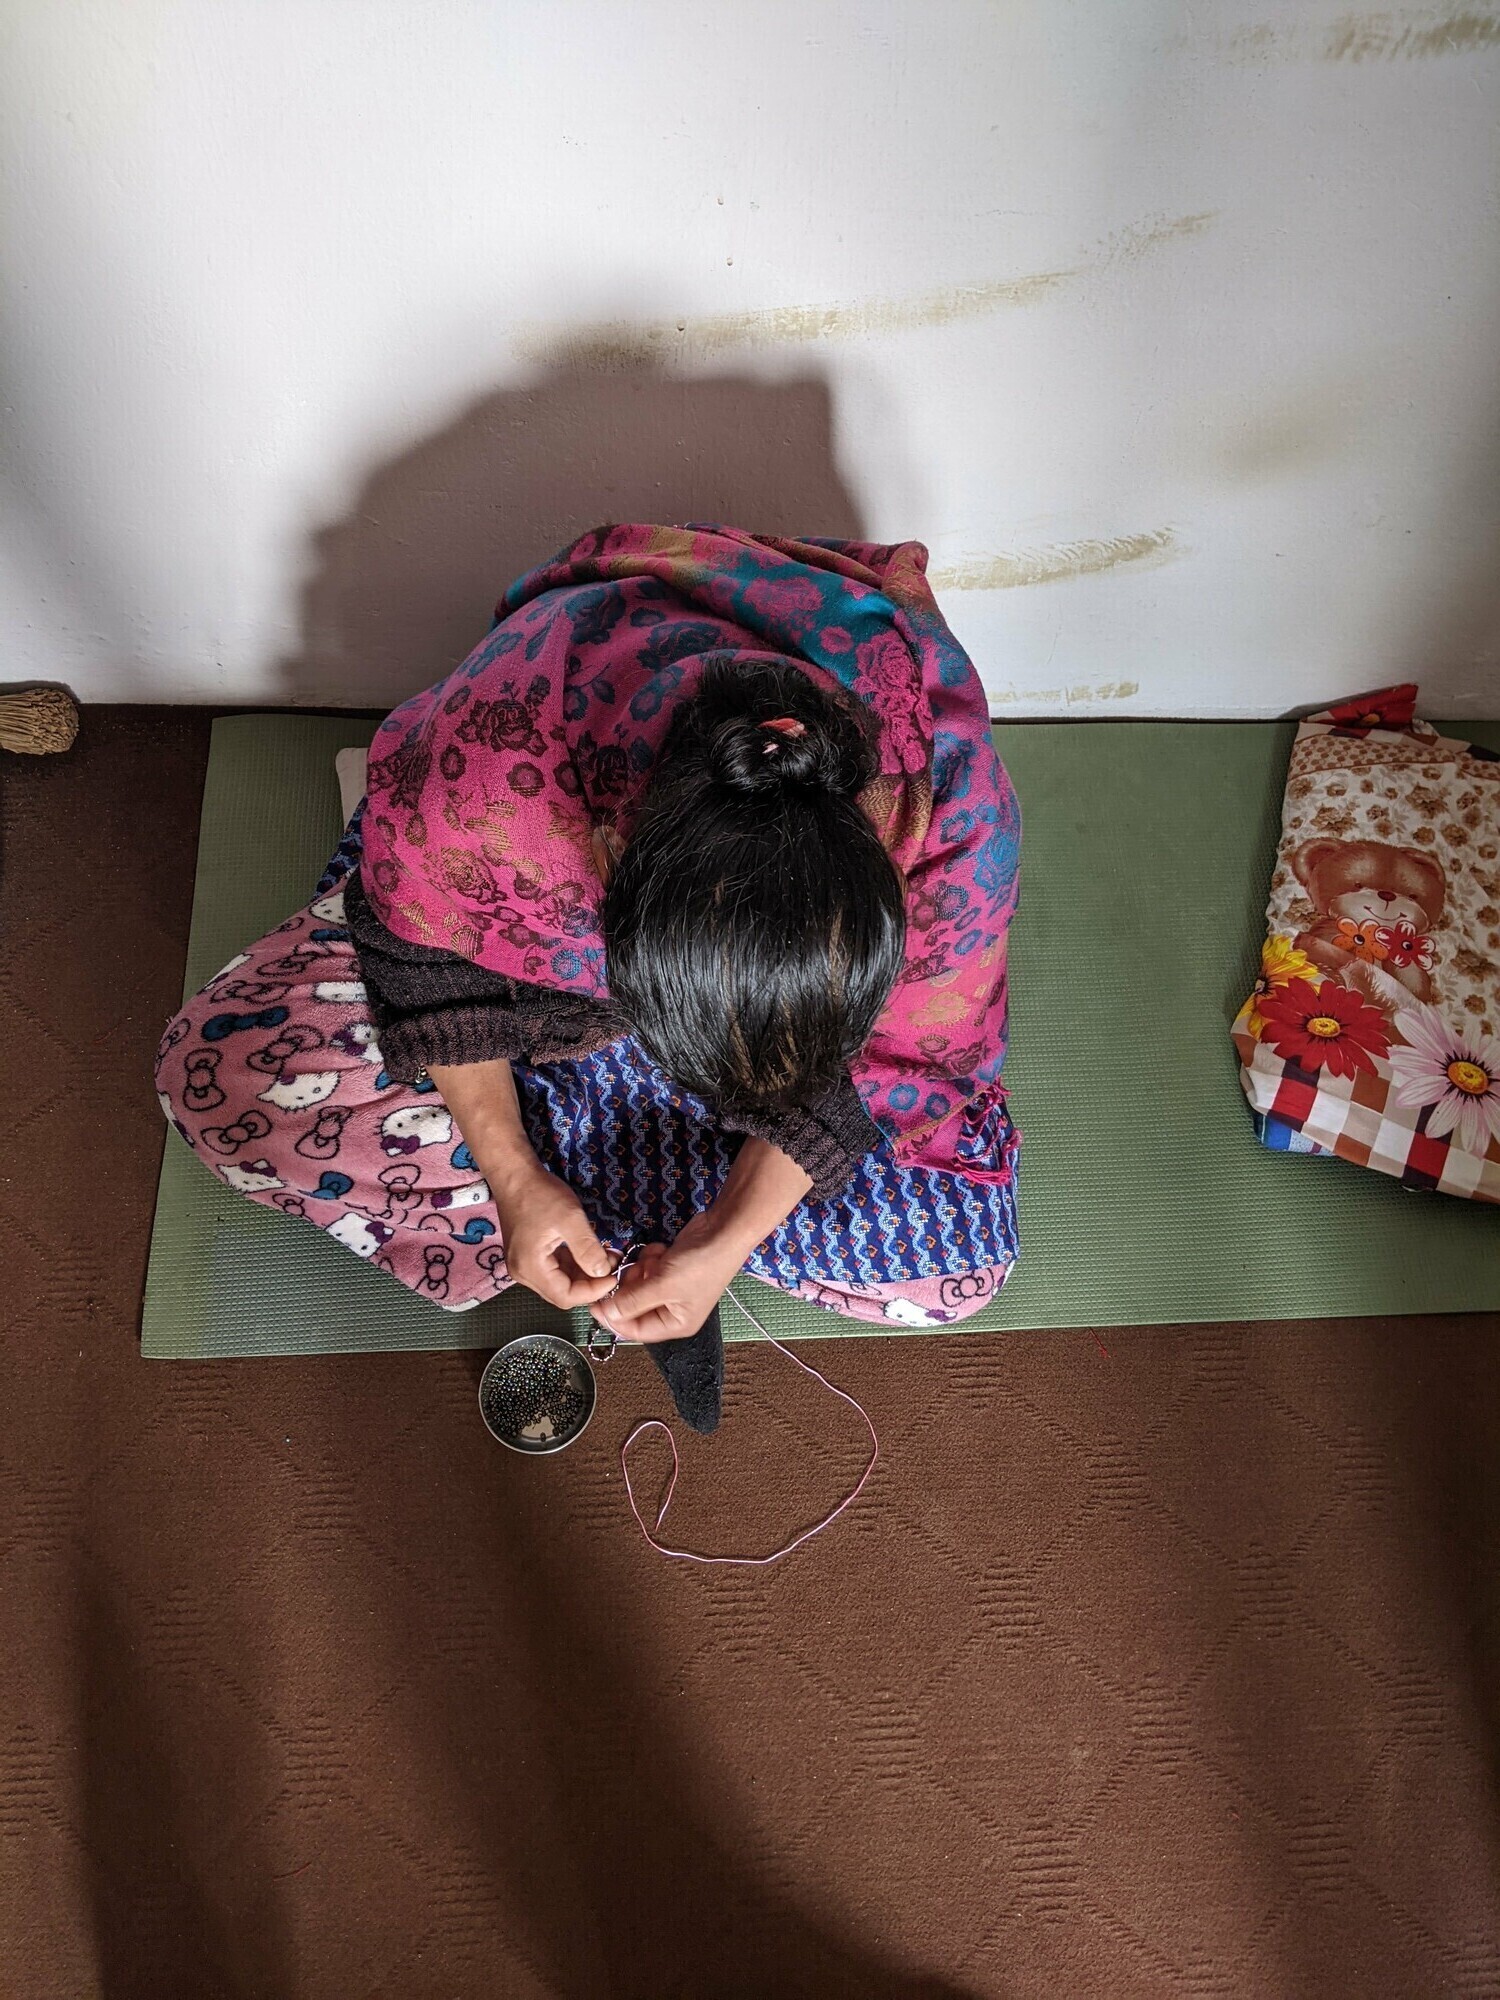 Woman sitting on a mat threading a needle.